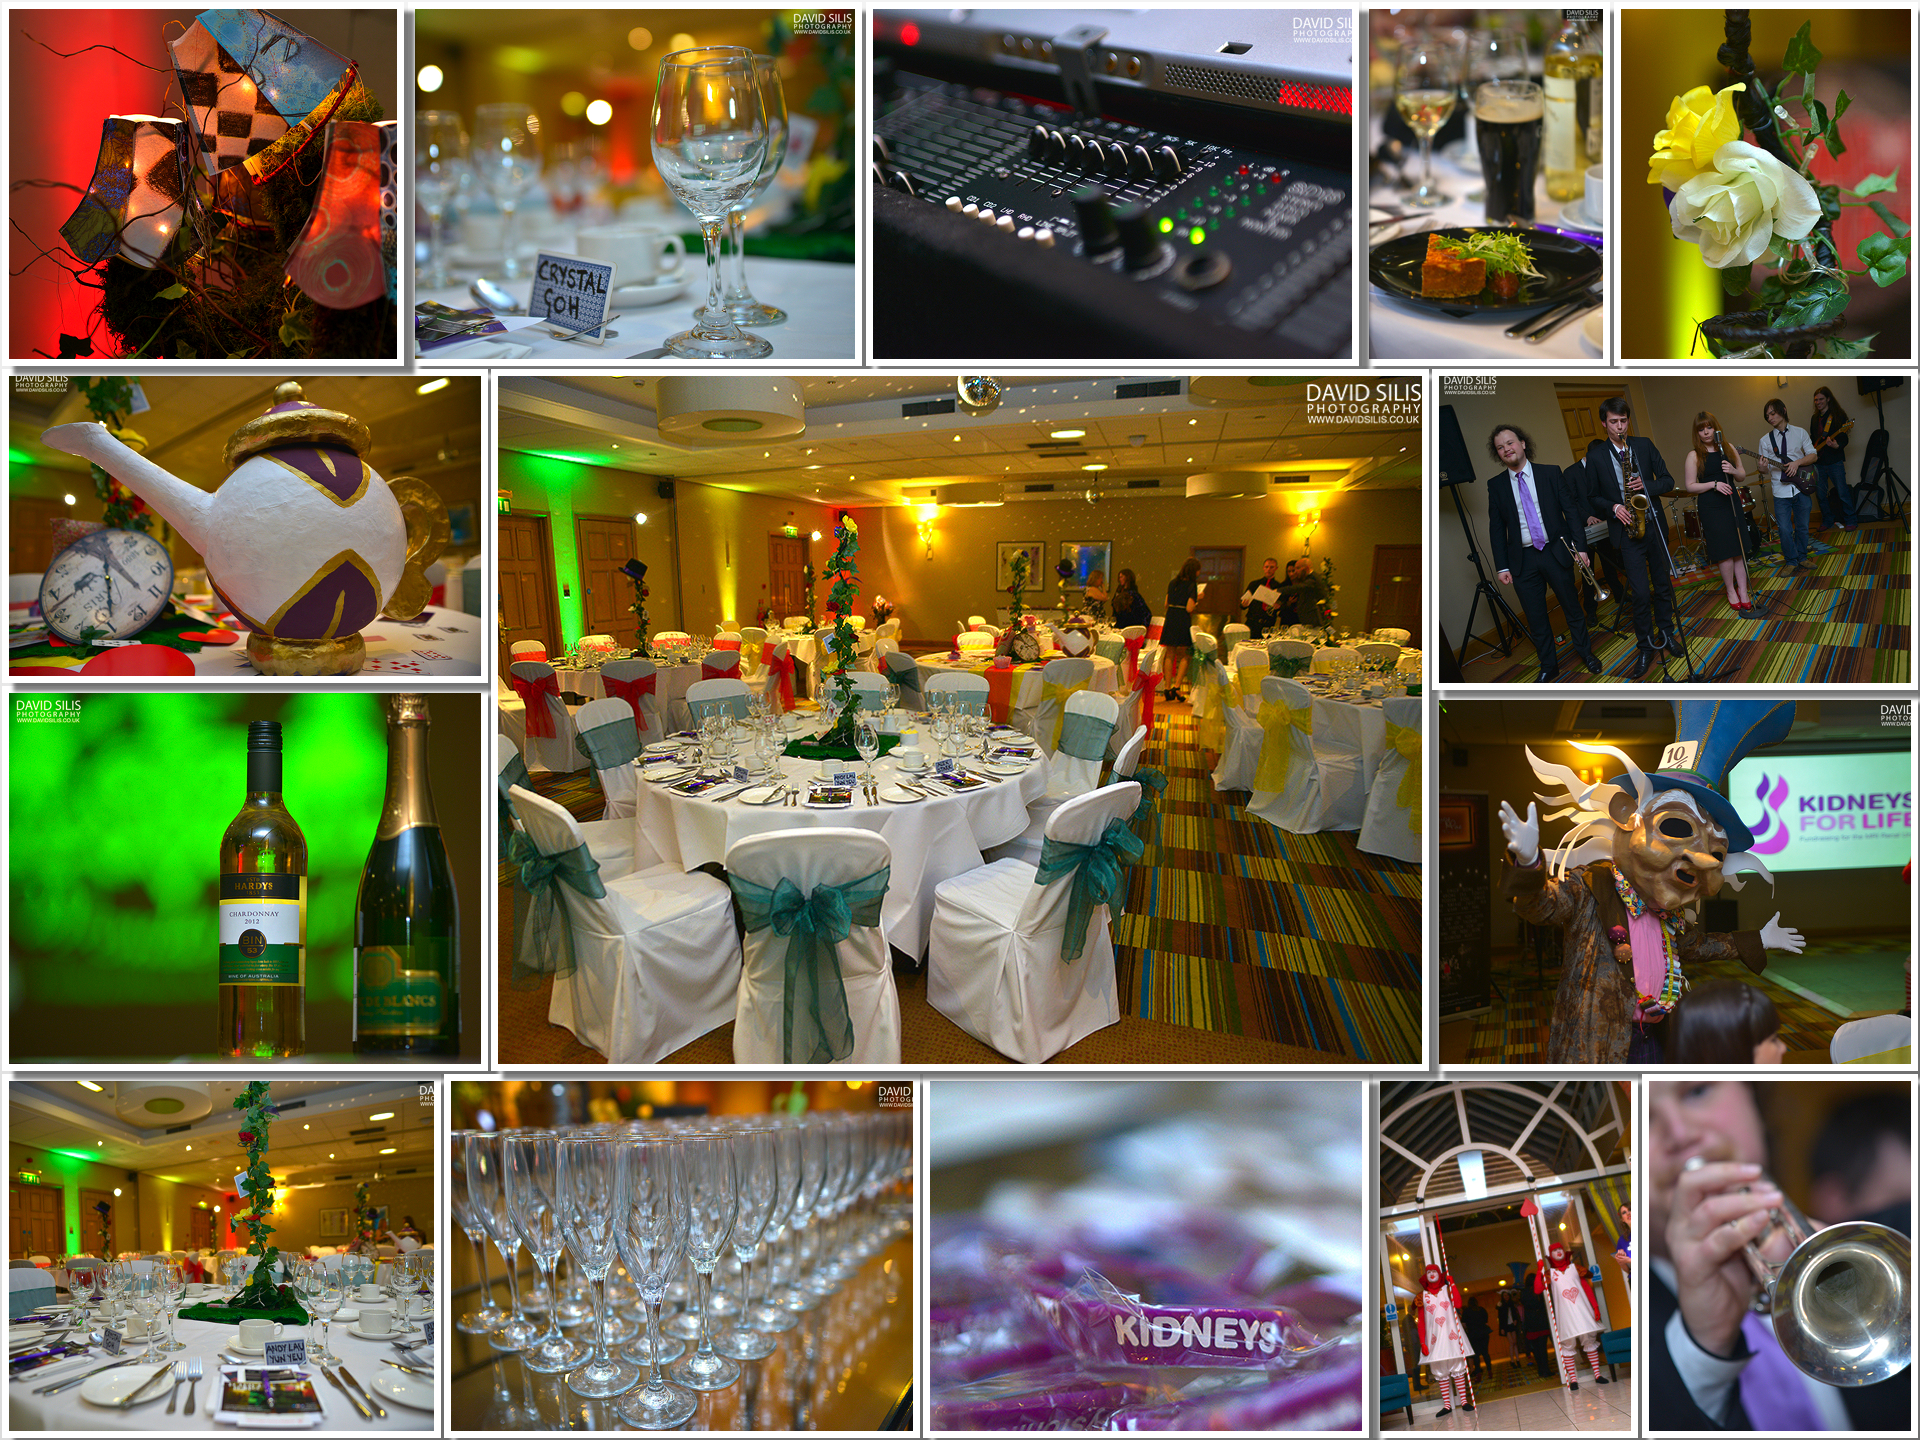 CHARITY EVENT (CORPORATE EVENT PHOTOGRAPHY)